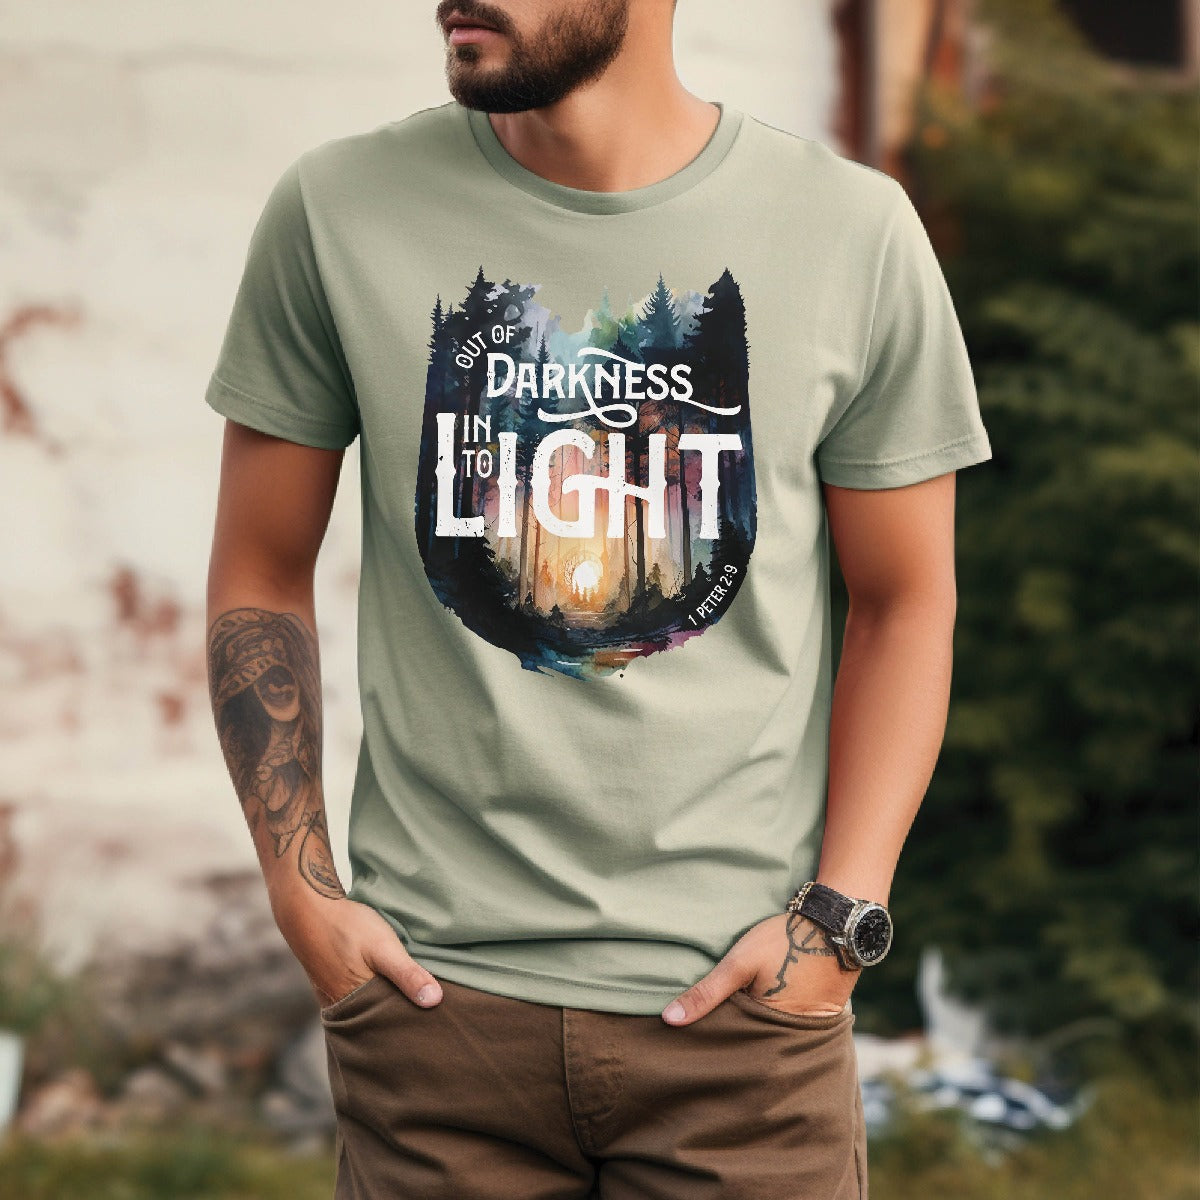 Young trendy man wearing Bay light sage green color garment dyed Comfort Colors C1717 unisex faith-based Christian t-shirt with "Out of Darkness, Into Light" 1 Peter 2:9 bible verse and watercolor moody forest trees outdoor scene, designed for men and women